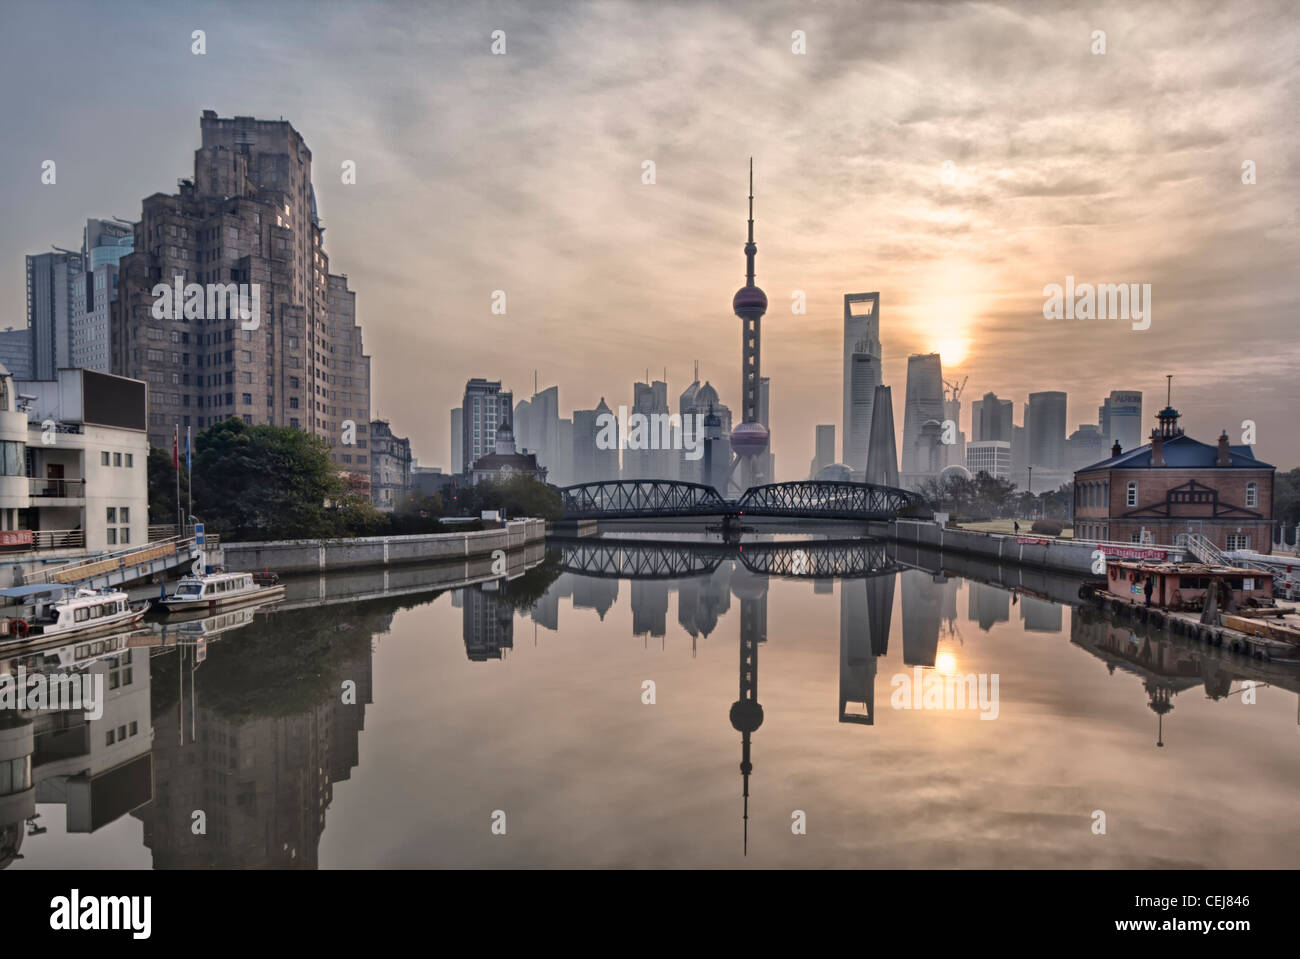 Morning Sunrise at the Suzhou river mouth, Shanghai, China. With Pudong skyline reflected in the water. Stock Photo